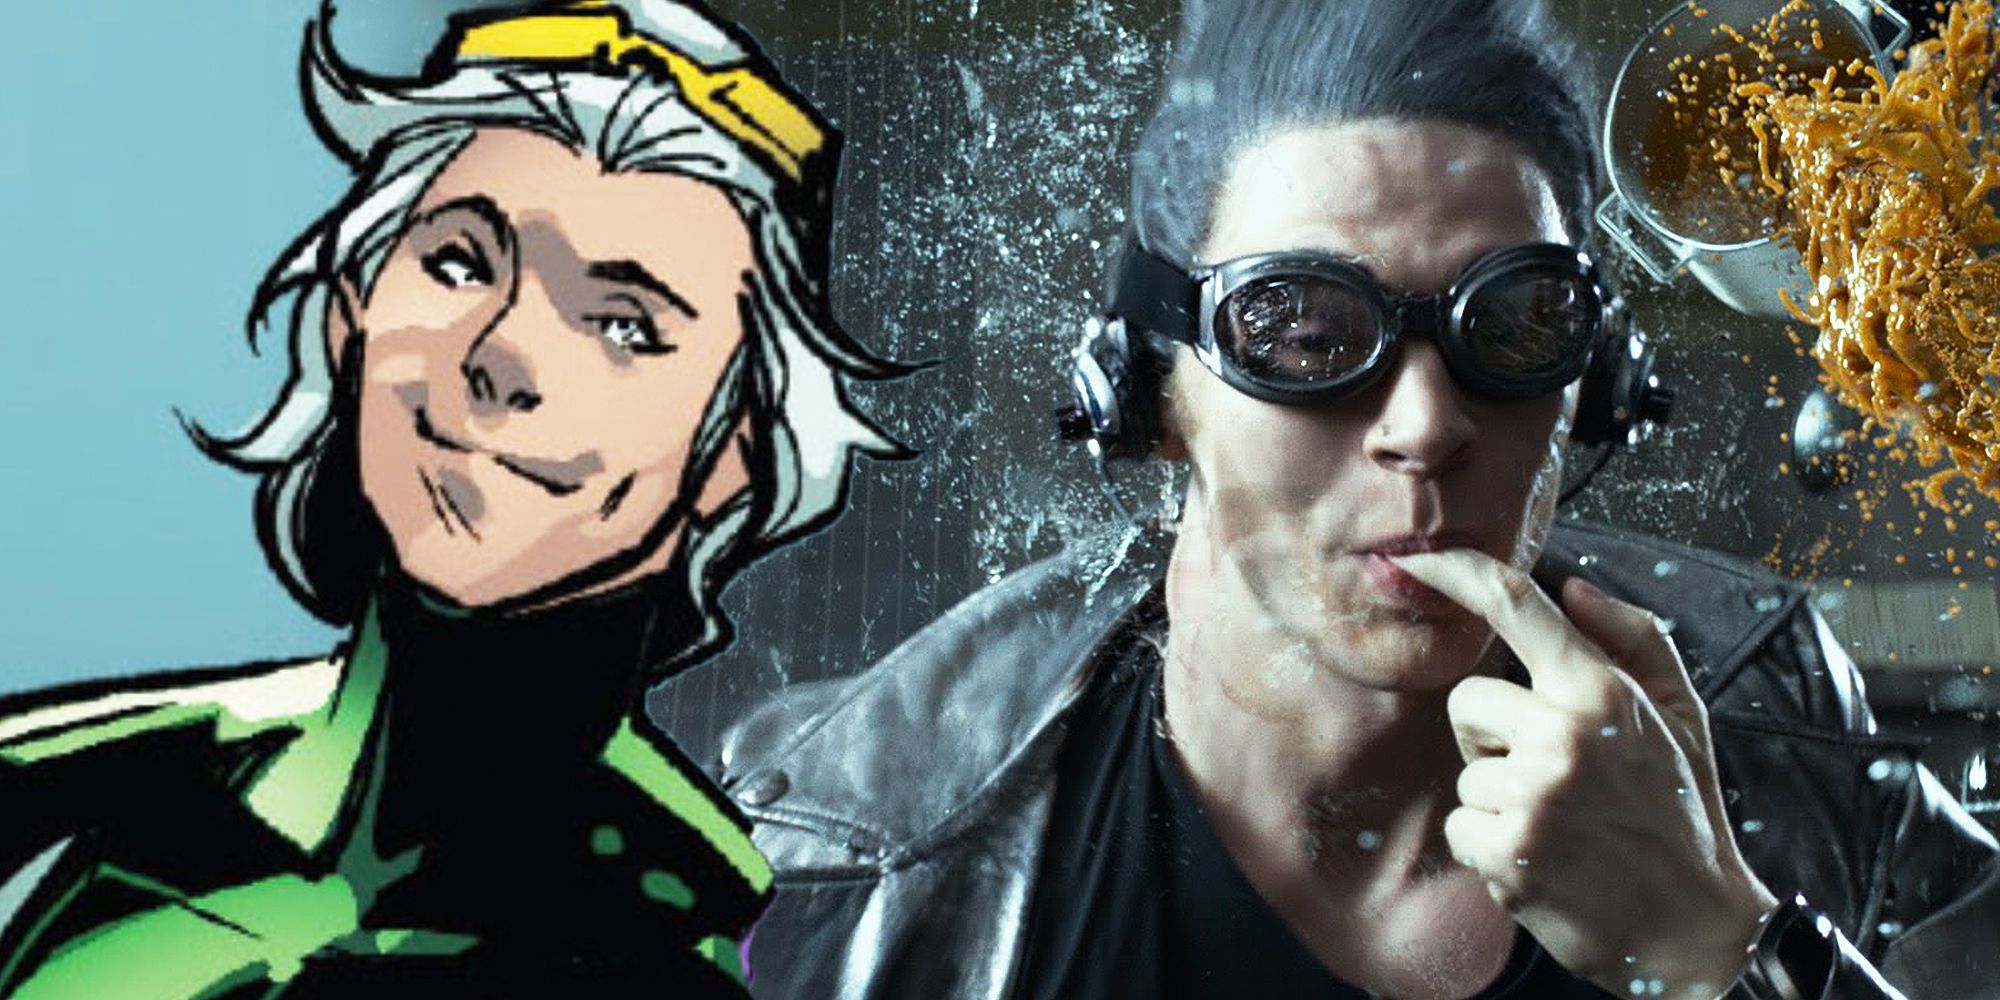 Evan Peters as Quicksilver in X-Men Days of Future Past and Speed in Marvel Comics